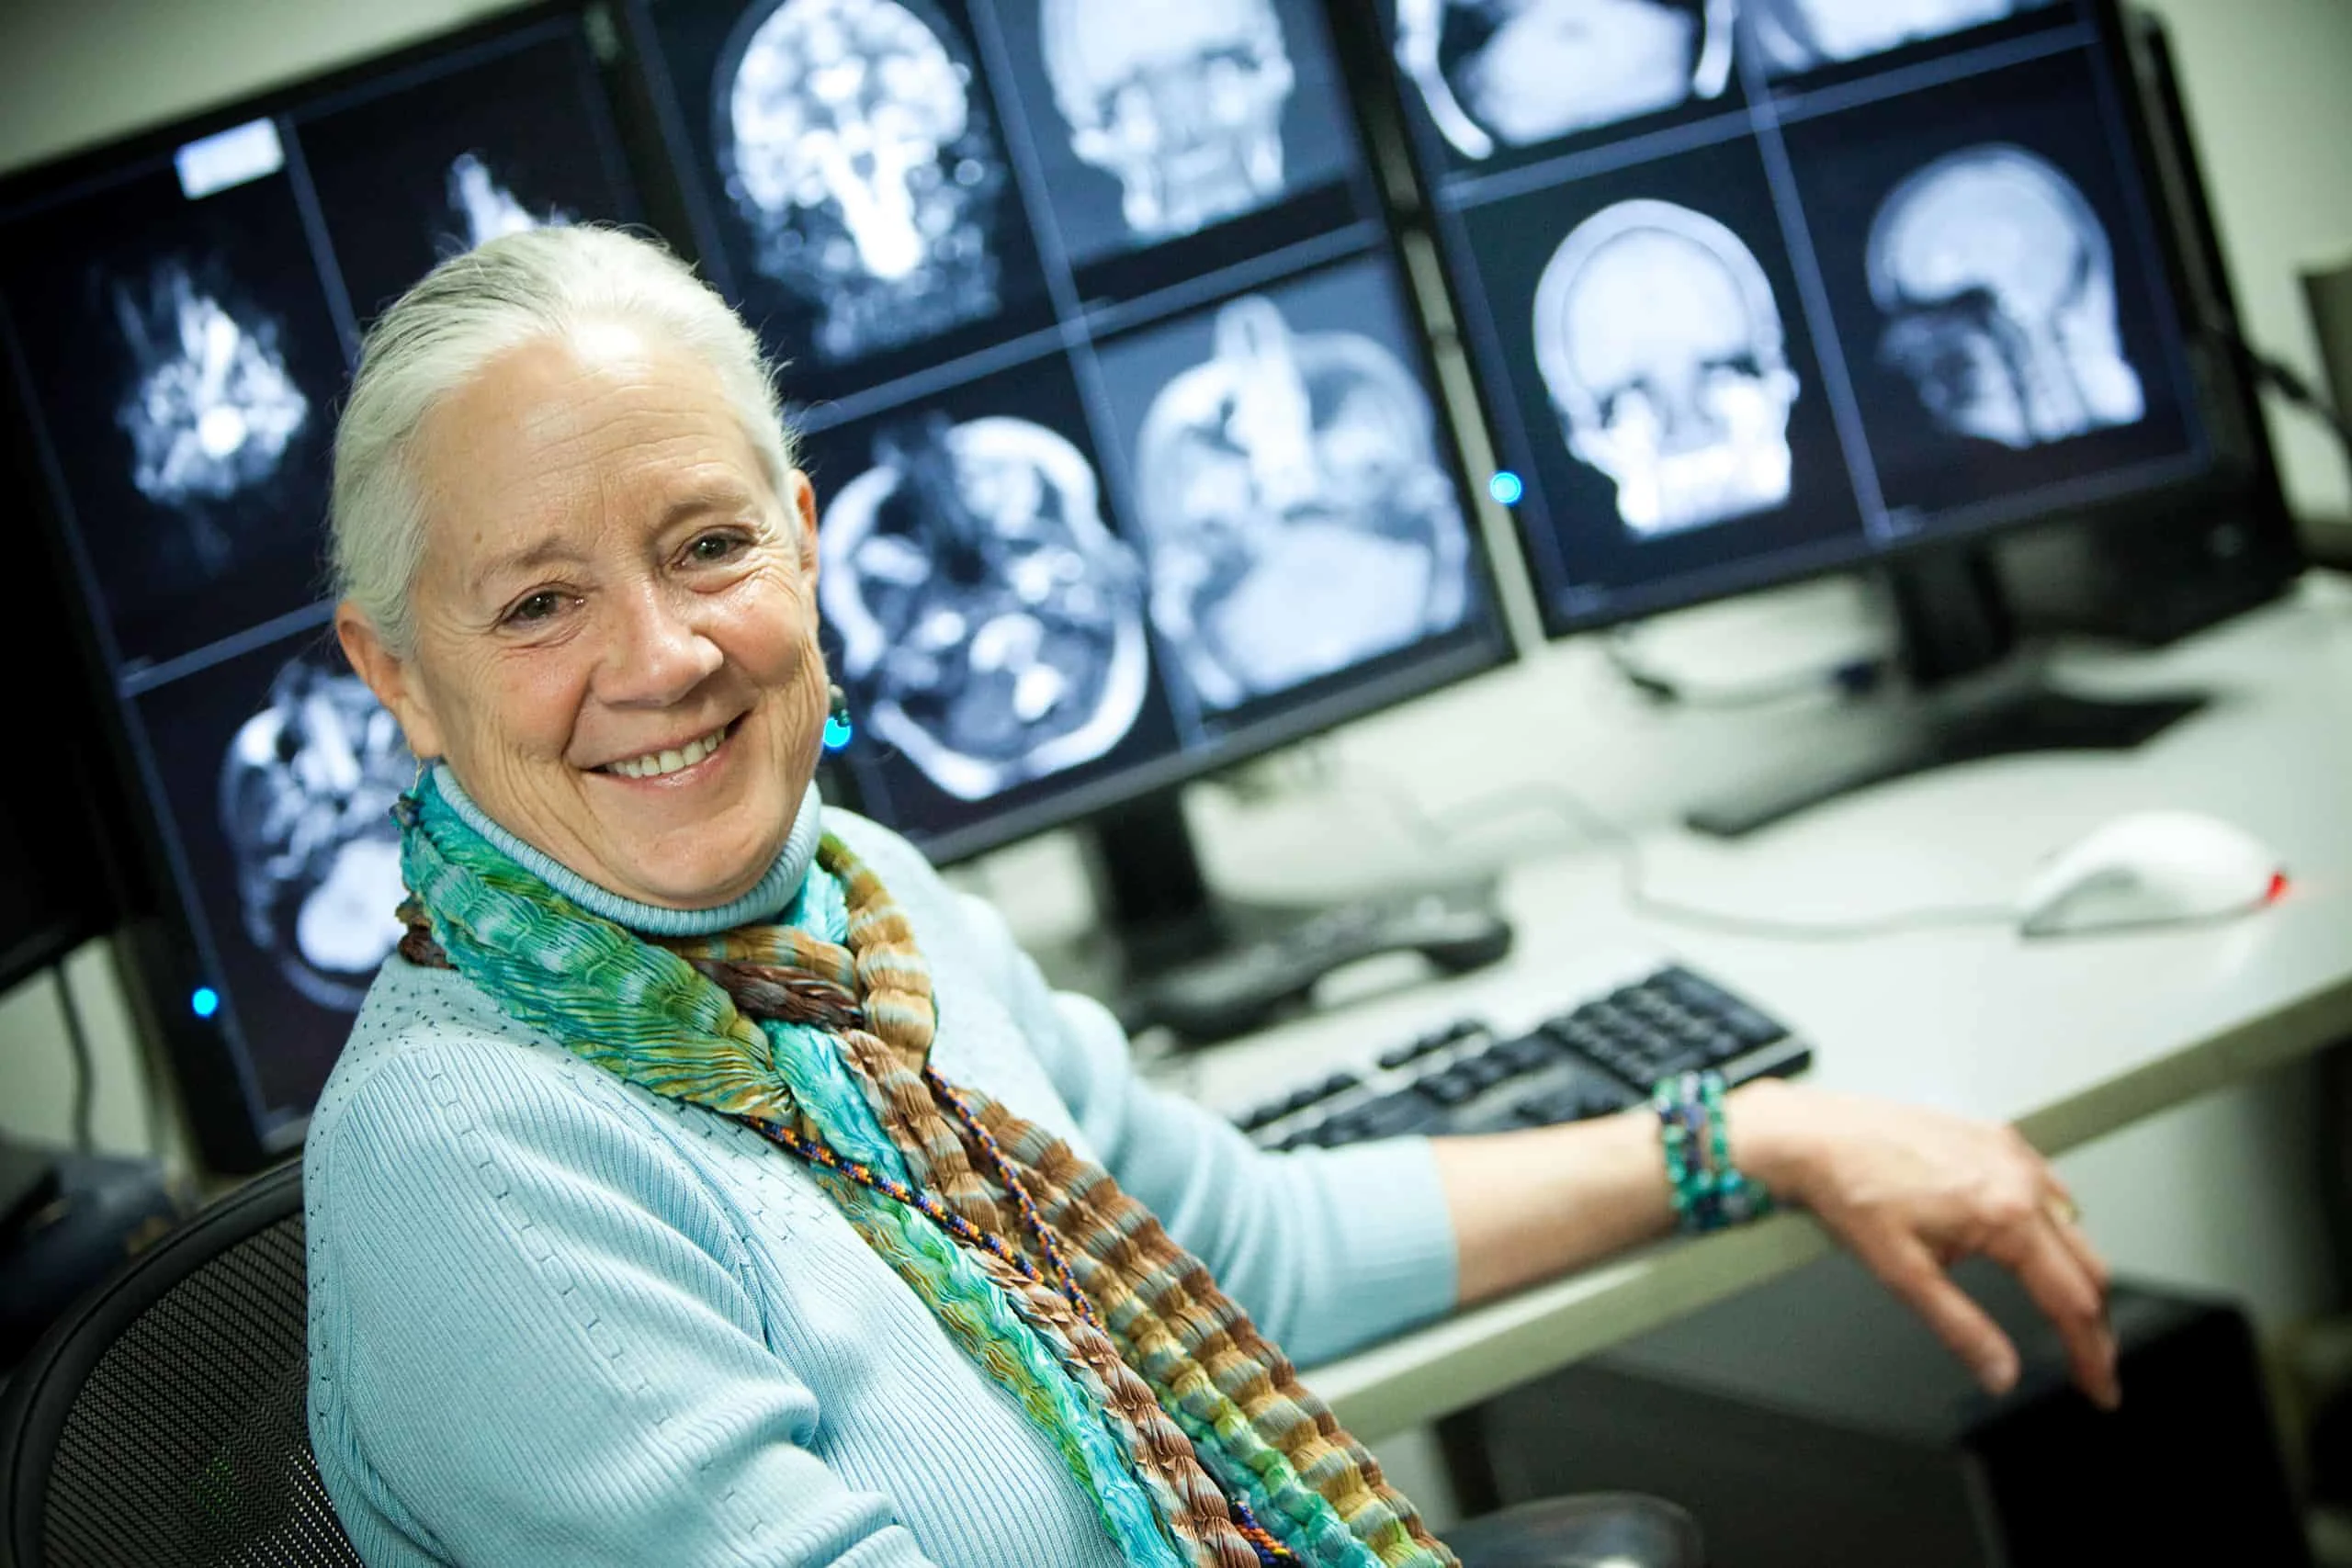 Dr. Anne Osborn in front of radiology screens